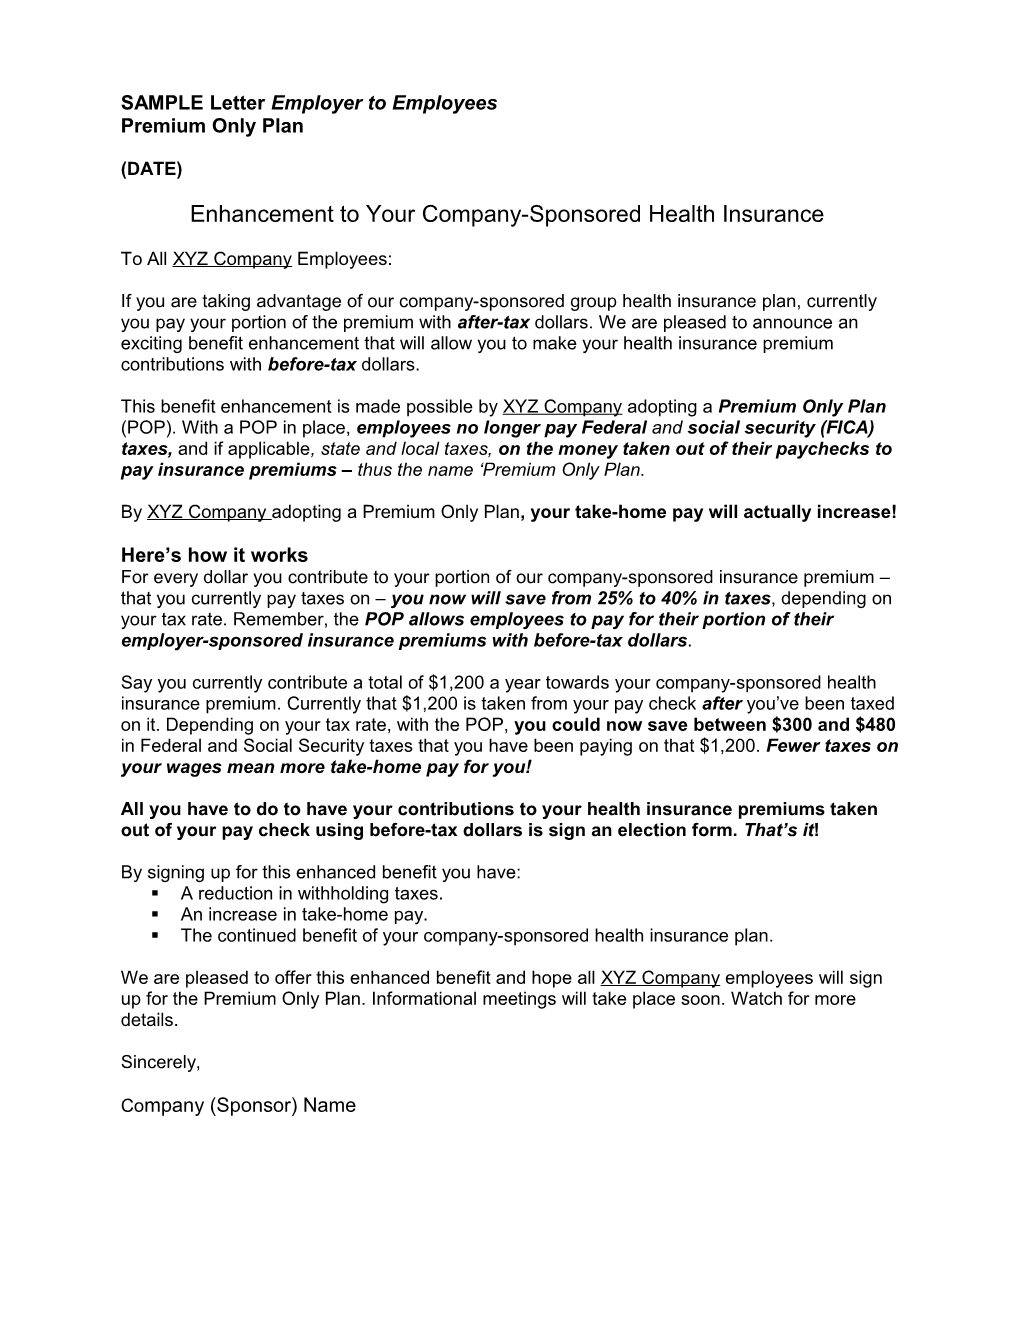 Letter from Employer to Employees